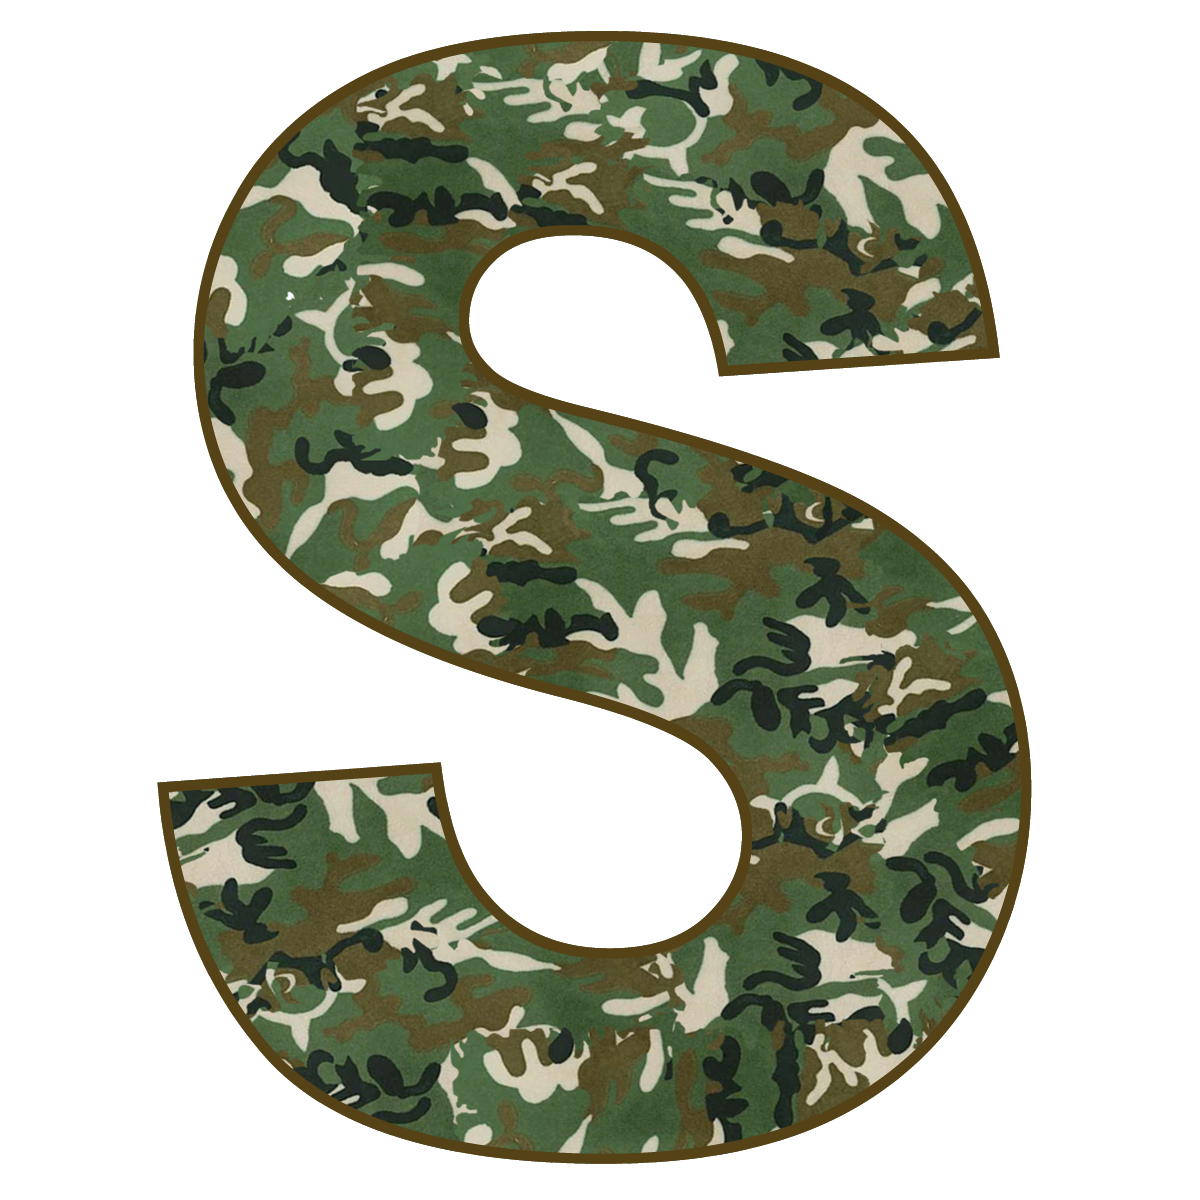 7-best-images-of-printable-camo-letters-green-camo-letters-free